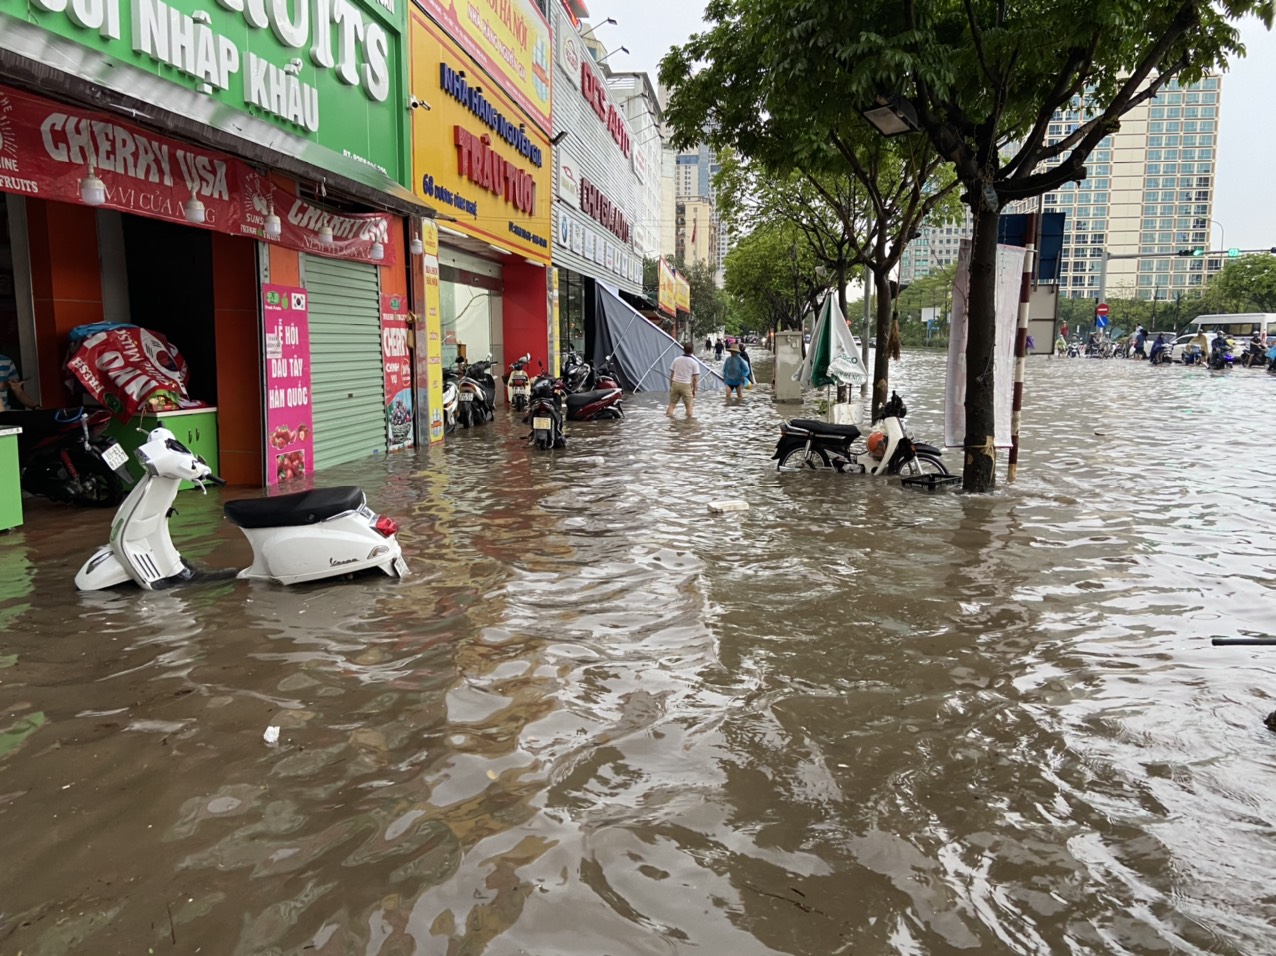 Duong Dinh Nghe Street in Cau Giay District, Hanoi is knee-deep in water, May 29, 2022. Photo: Quang The / Tuoi Tre